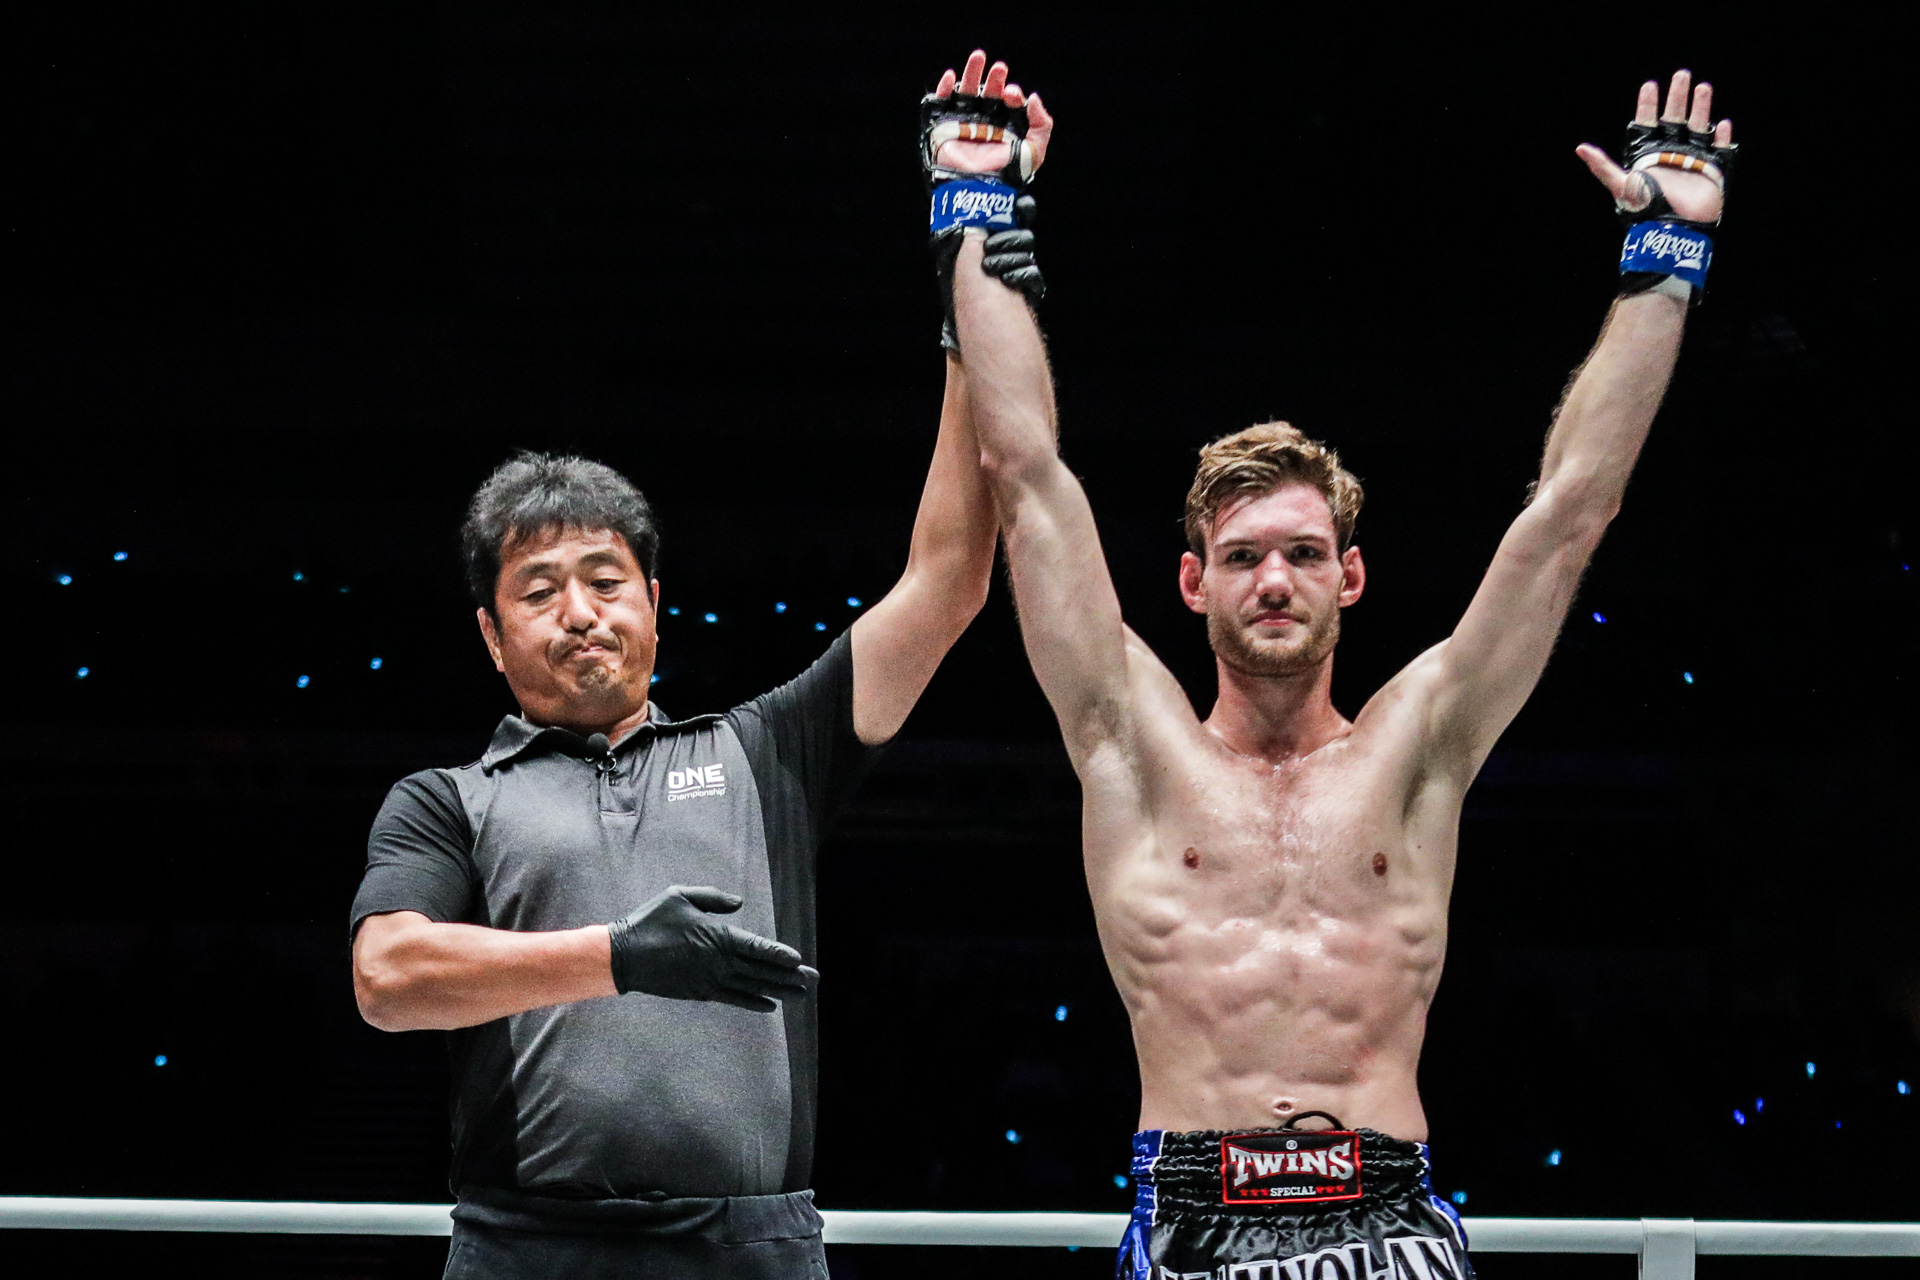 Knowlesy Academy's Liam Nolan earns 1st ONE Super Series win, decisions Brown Pinas at 'ONE: Edge of Greatness' in Singapore